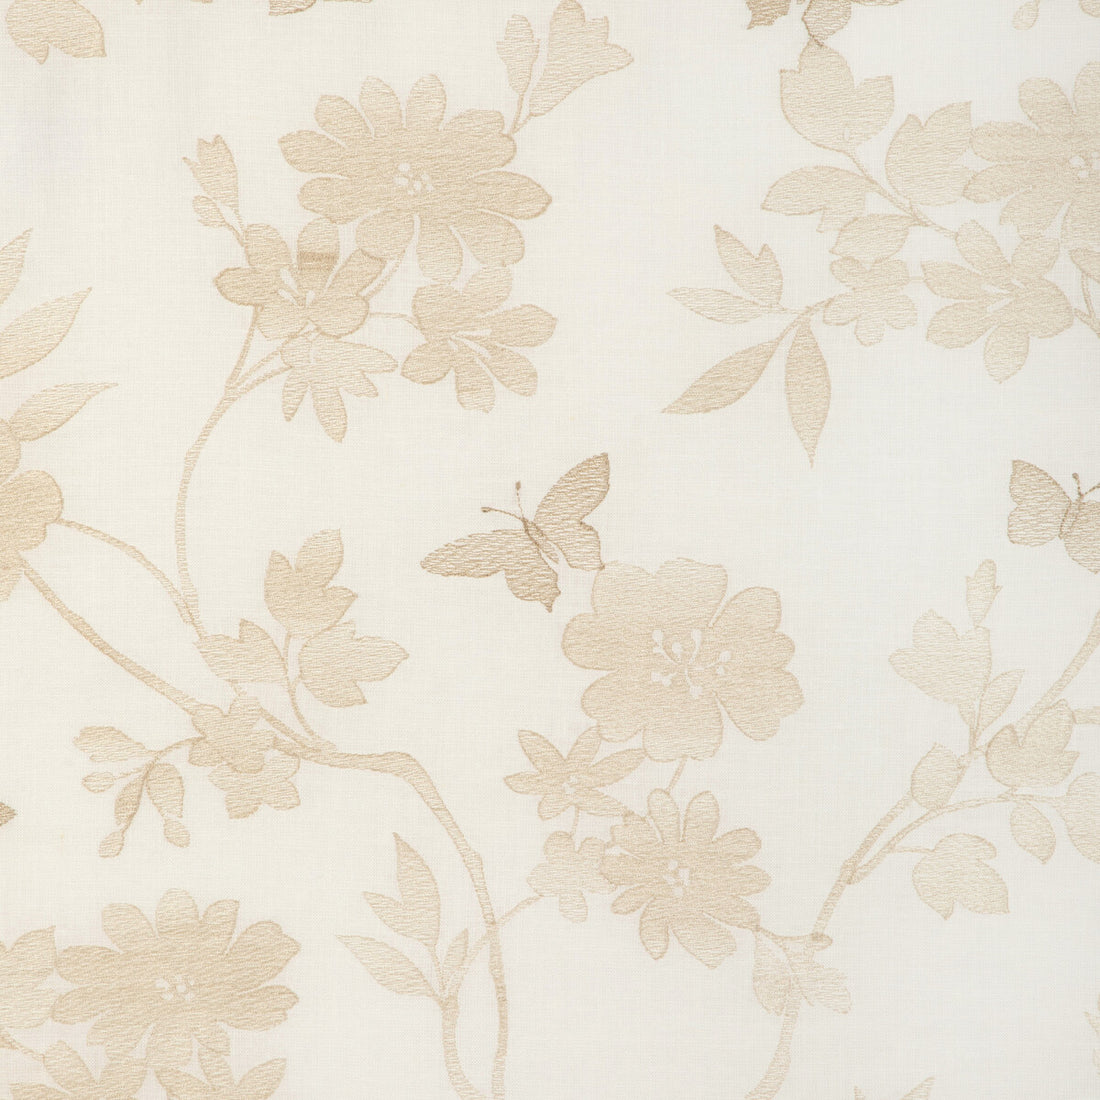 Flutter Vine fabric in buff color - pattern 5000.16.0 - by Kravet Design in the Candice Olson collection